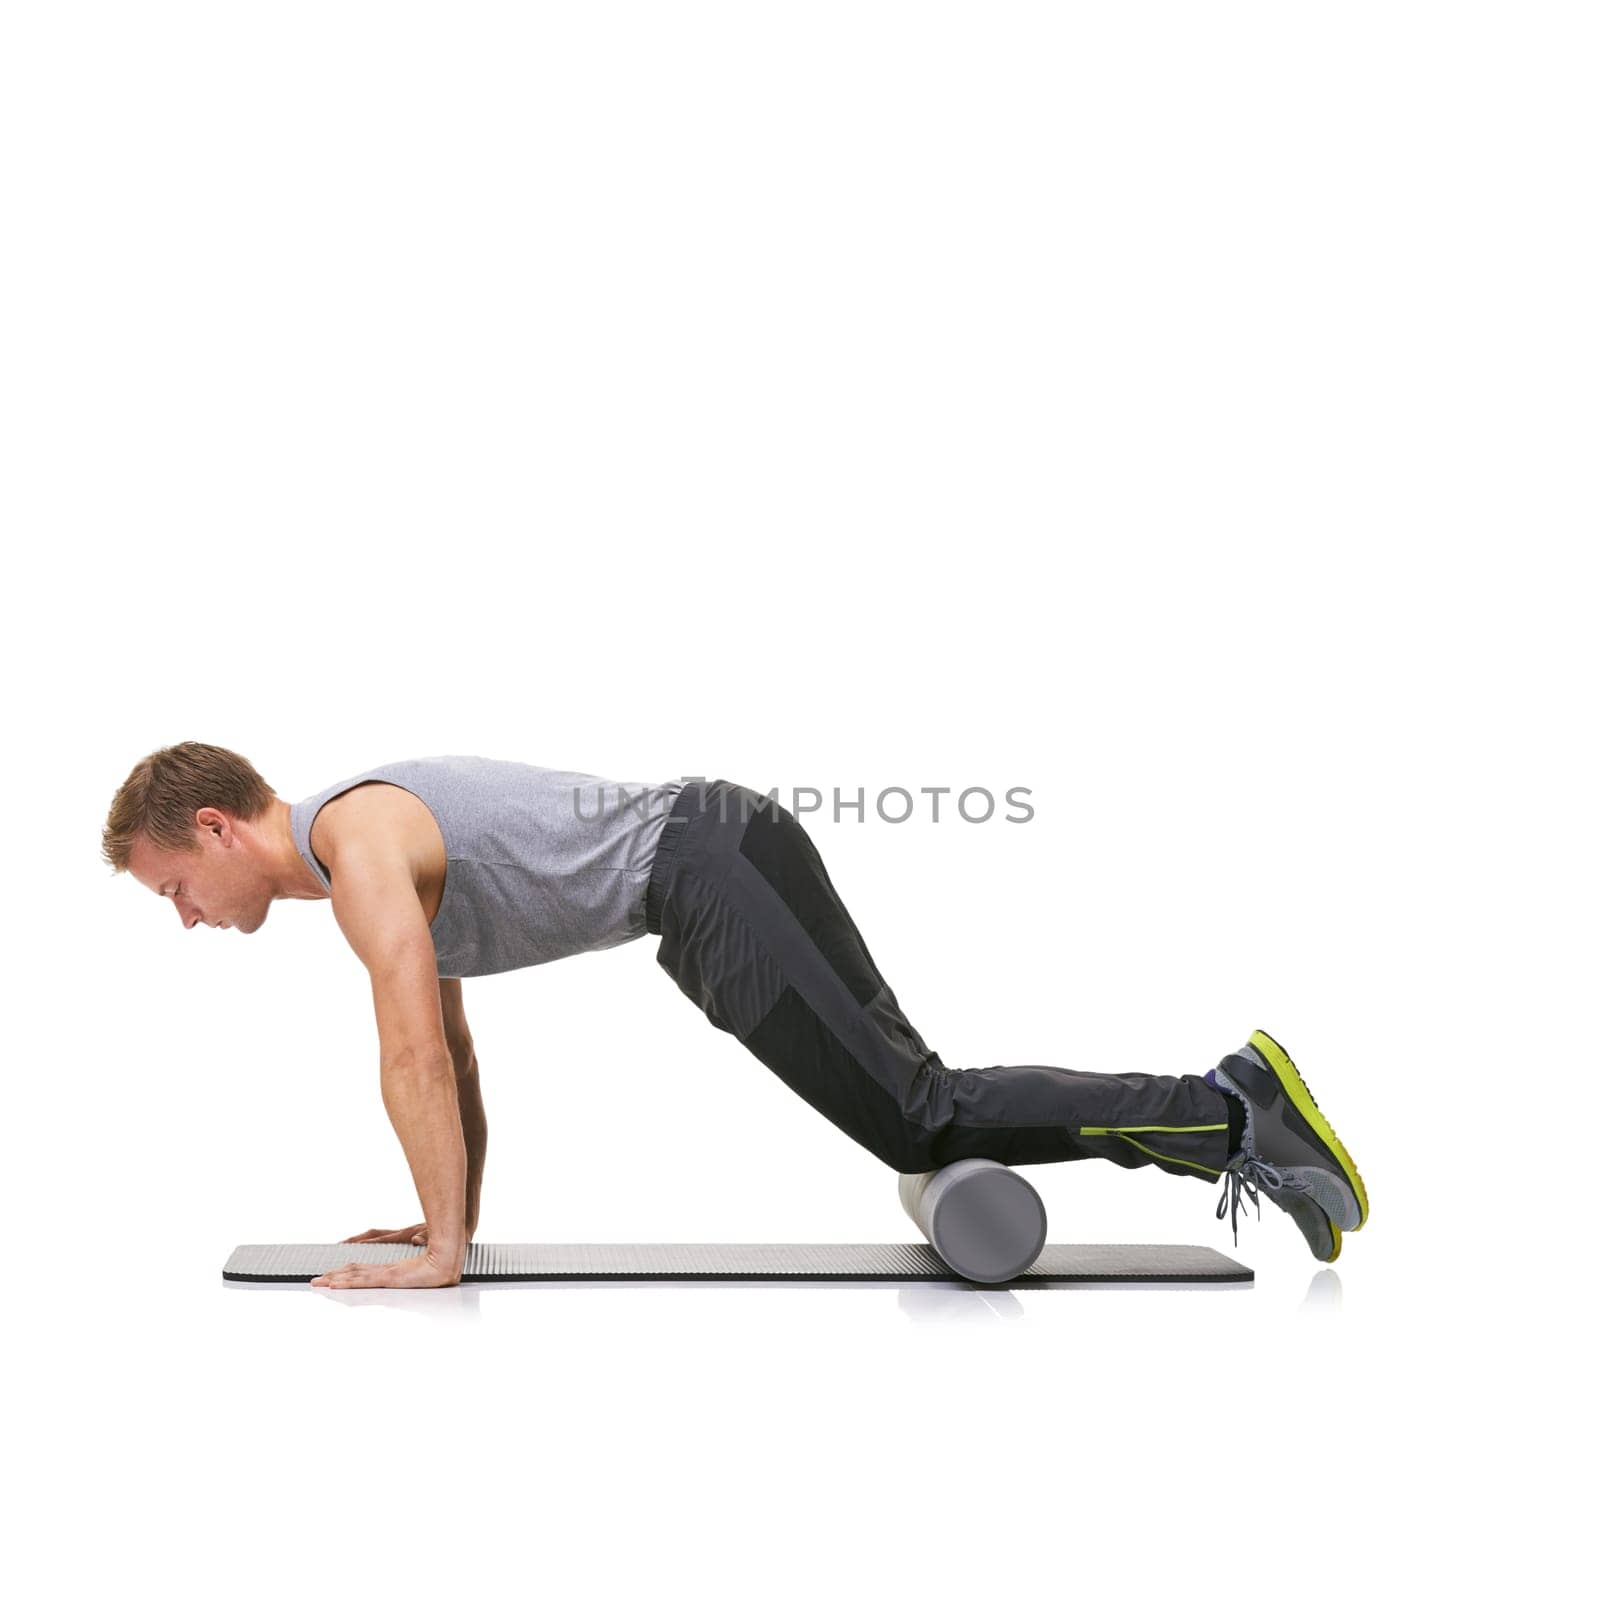 Arm exercise, foam roller and man in push up for strength training, muscle endurance or pilates rehabilitation workout on ground. Yoga mat, mockup studio space or active person on white background.